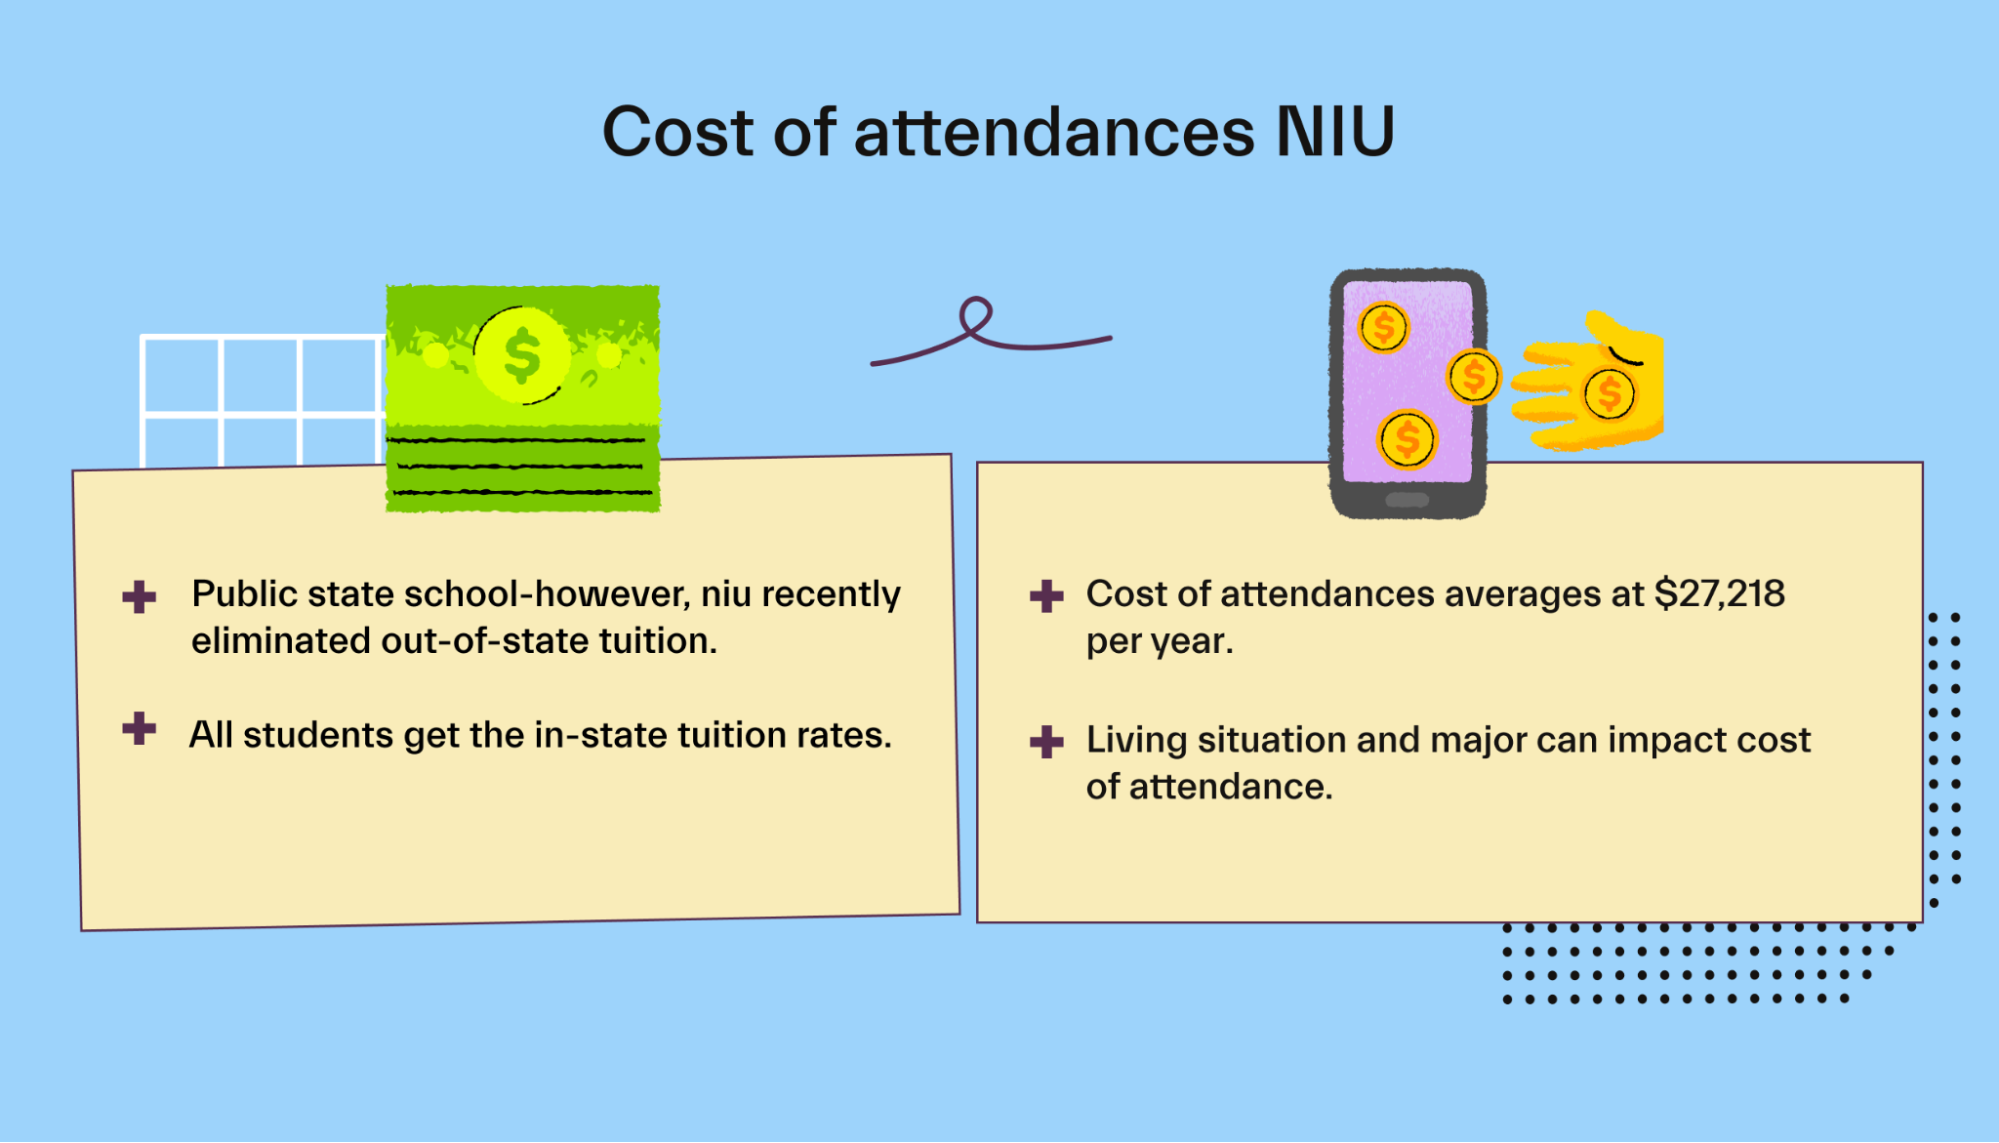 Cost of attendances